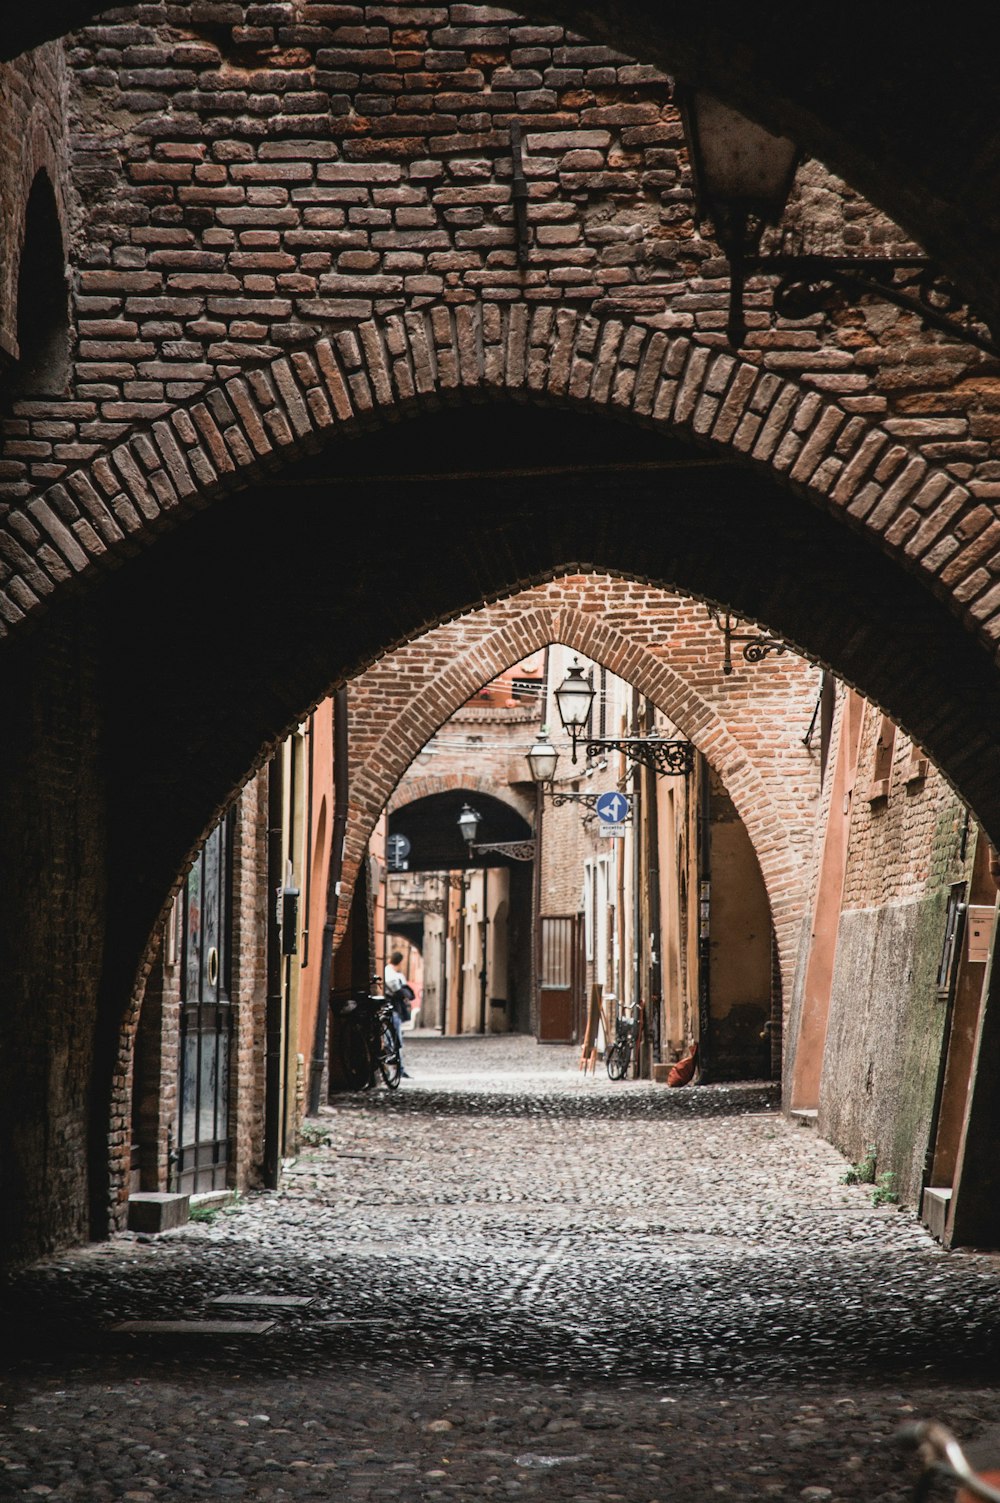 a narrow alley way with a person sitting on a bench